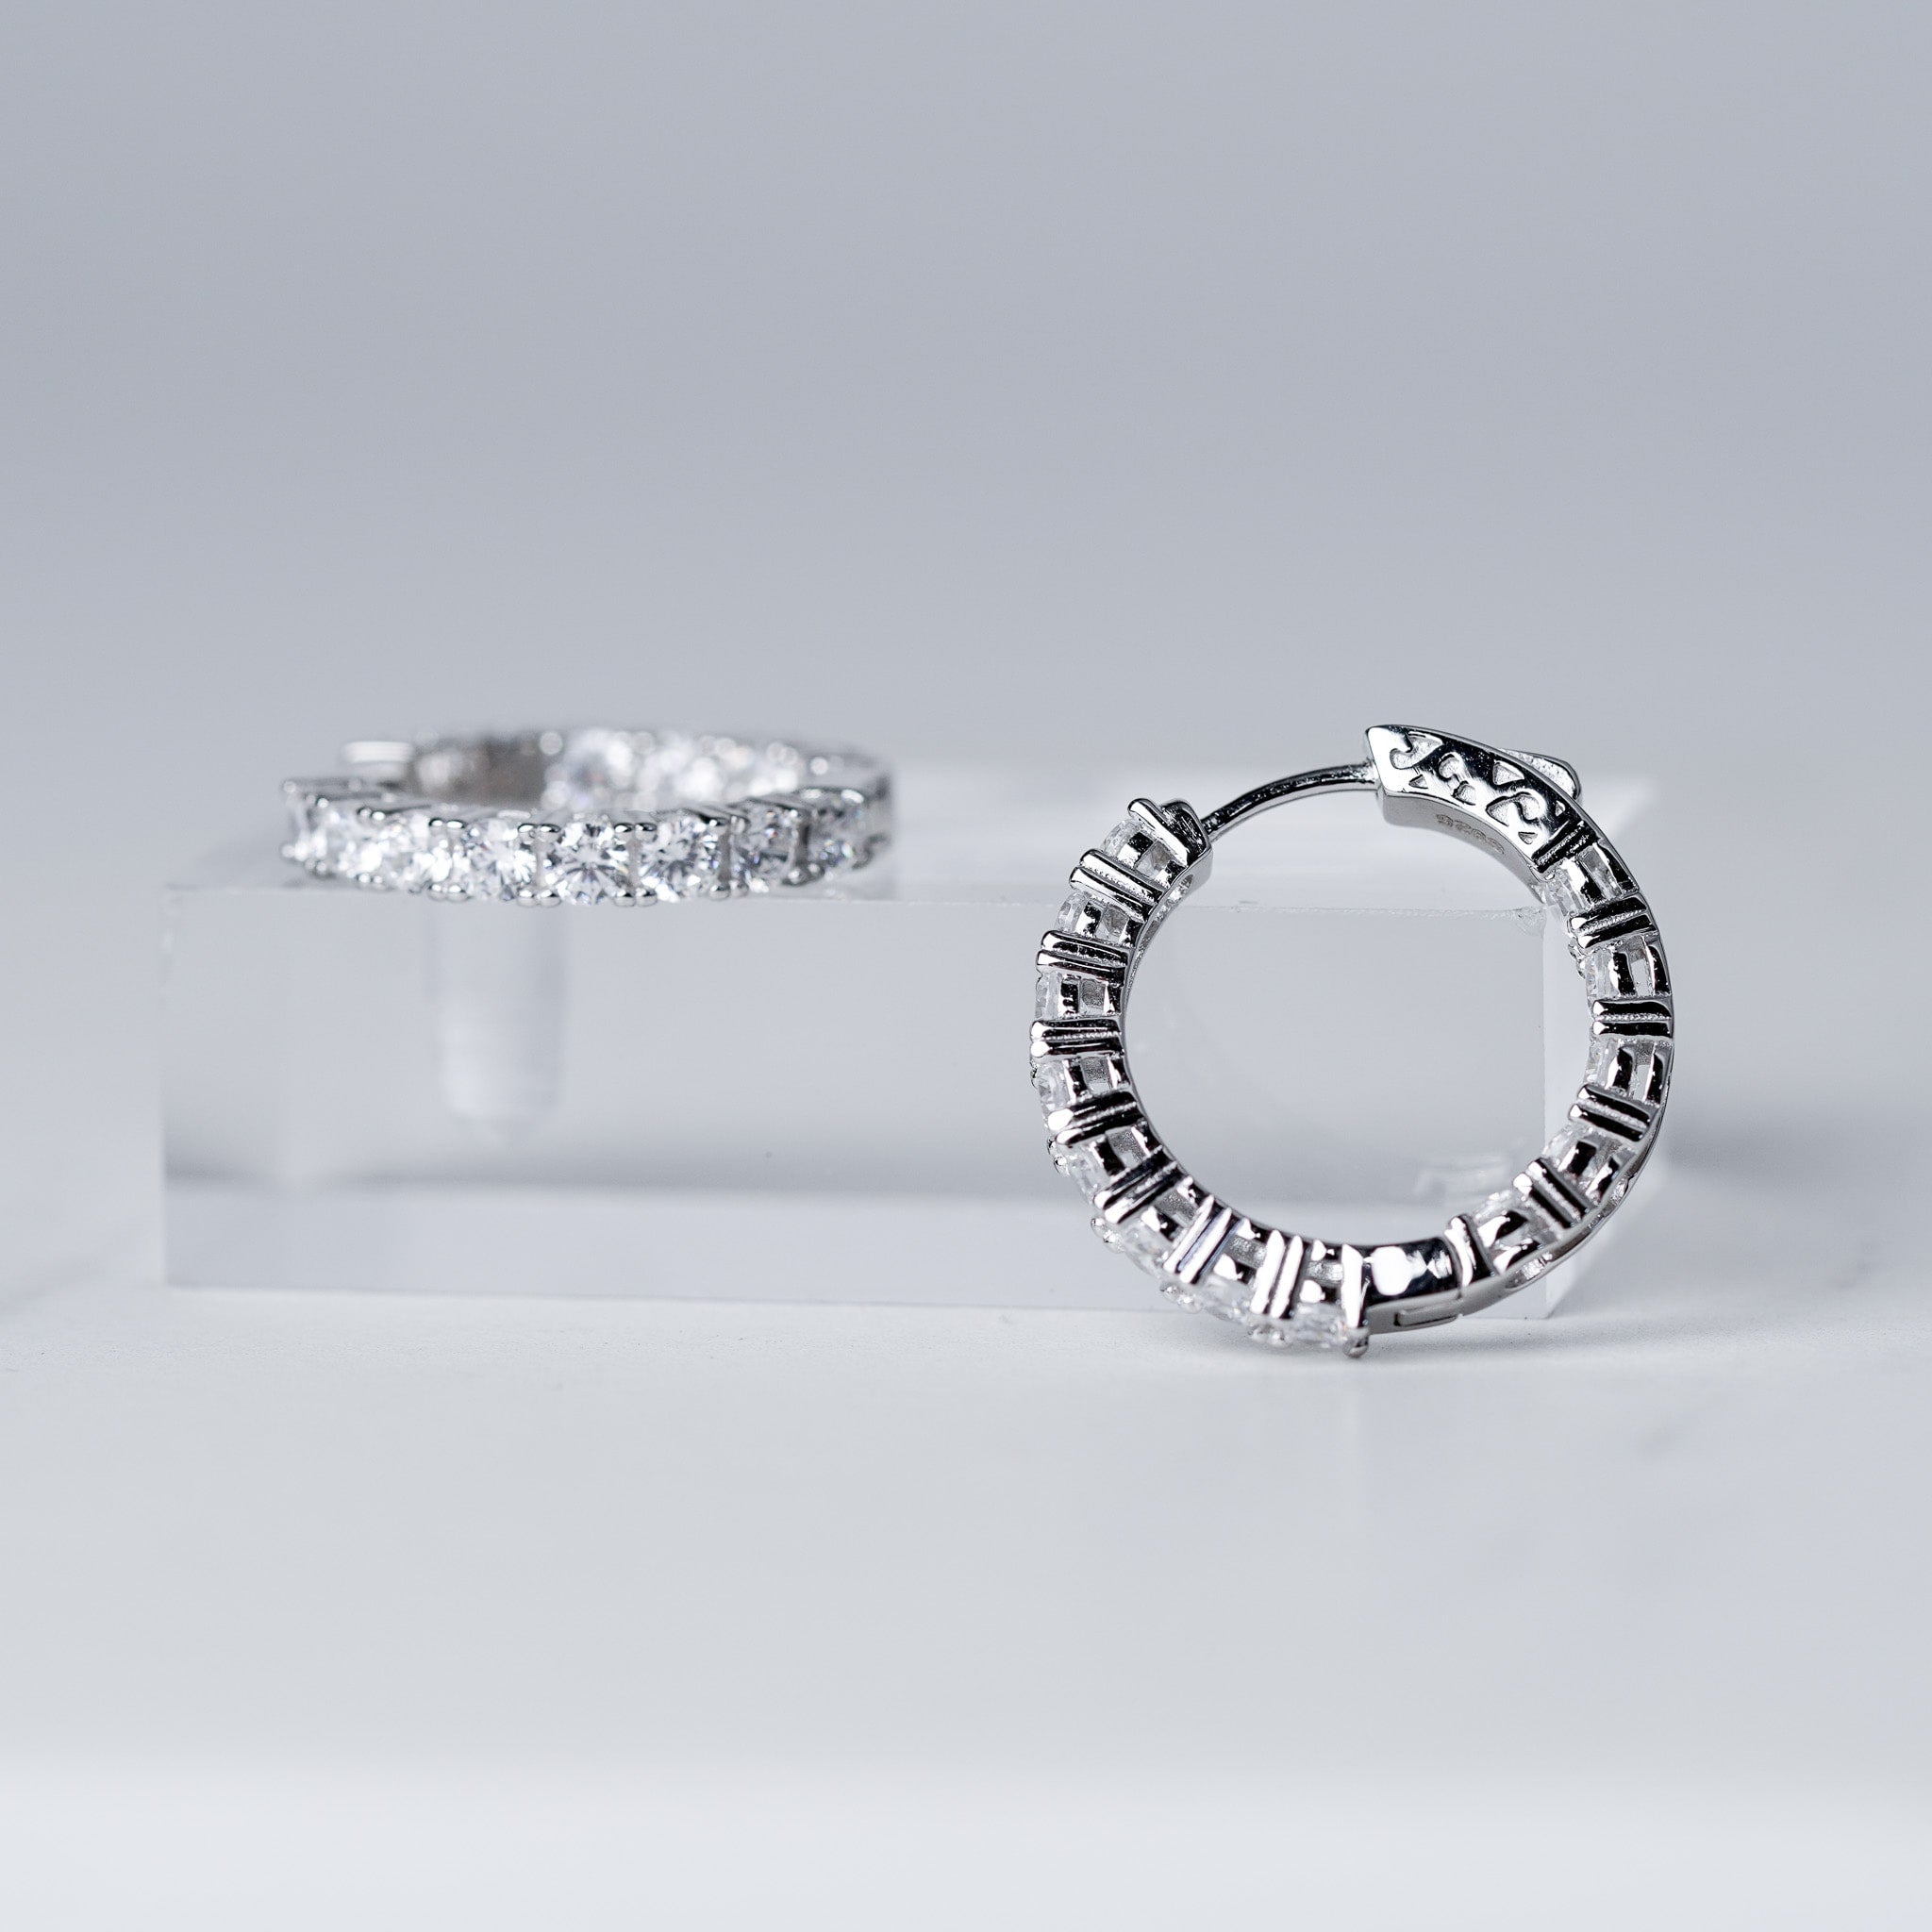 Front and Back Simulated Diamond Hoop Earrings